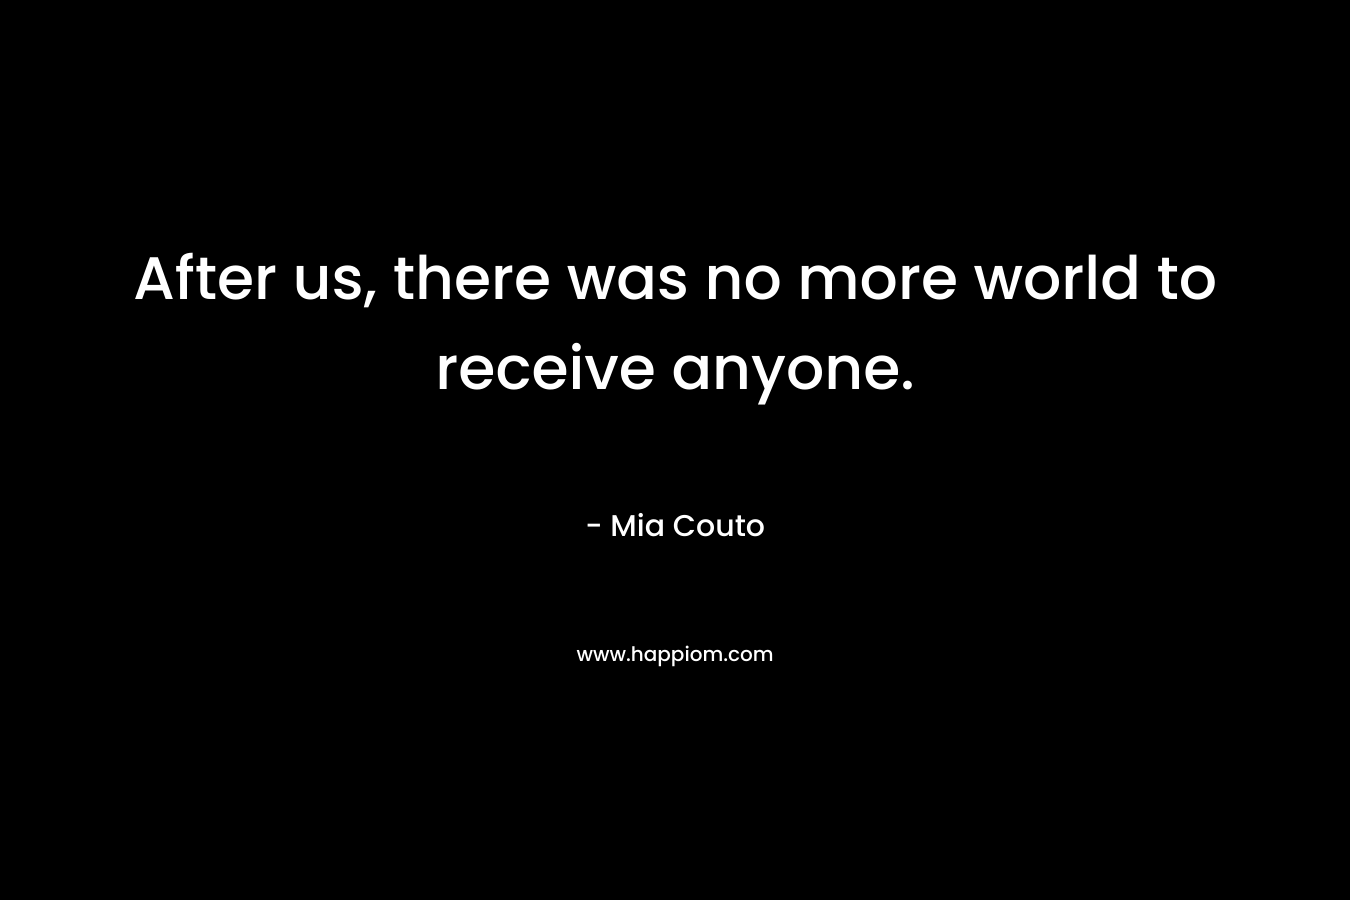 After us, there was no more world to receive anyone. – Mia Couto